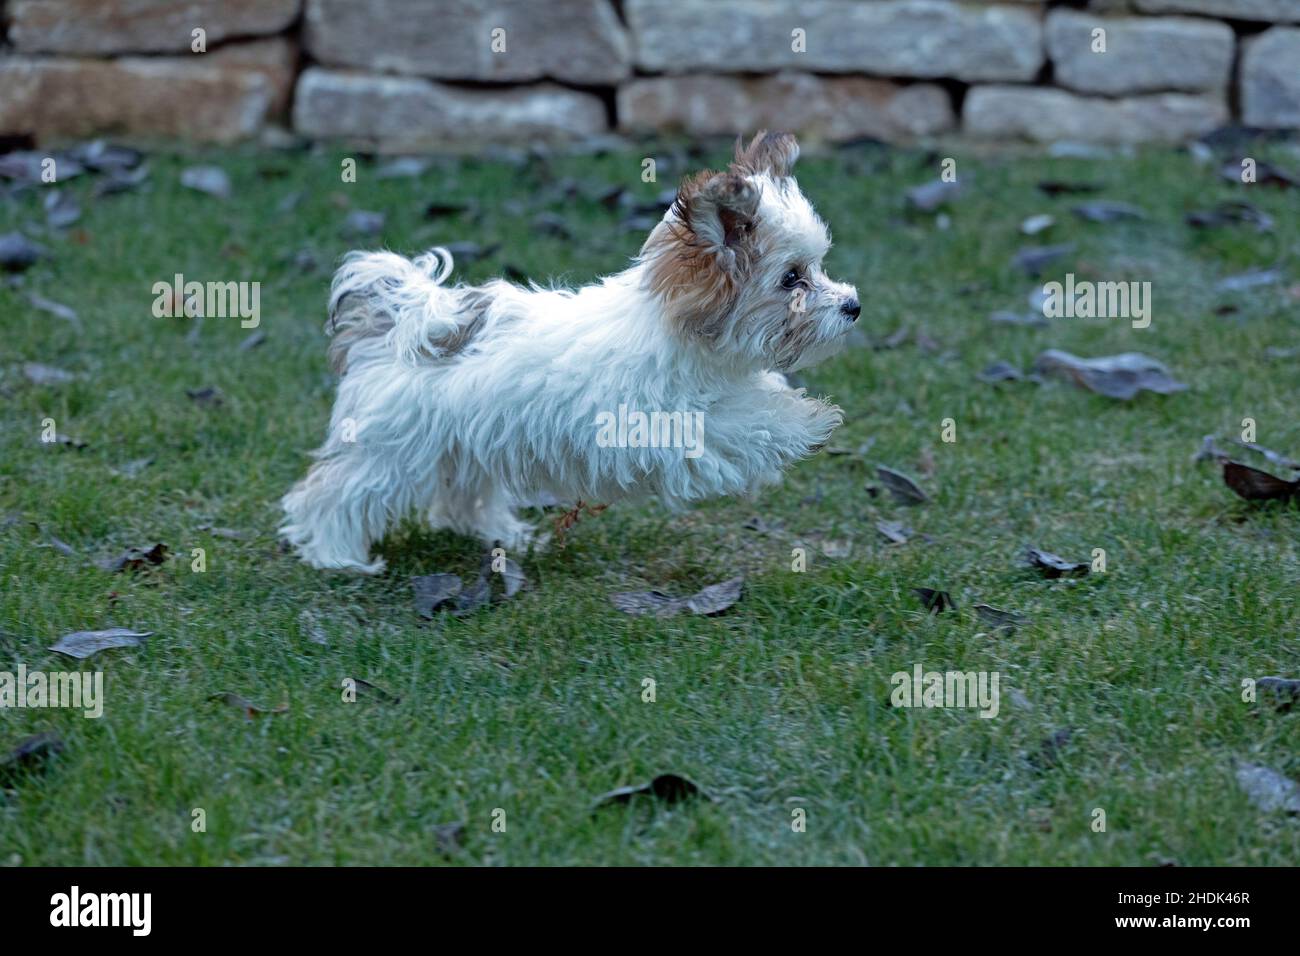 Bolonka Zwetna toy dog pup running across lawn, Germany Stock Photo